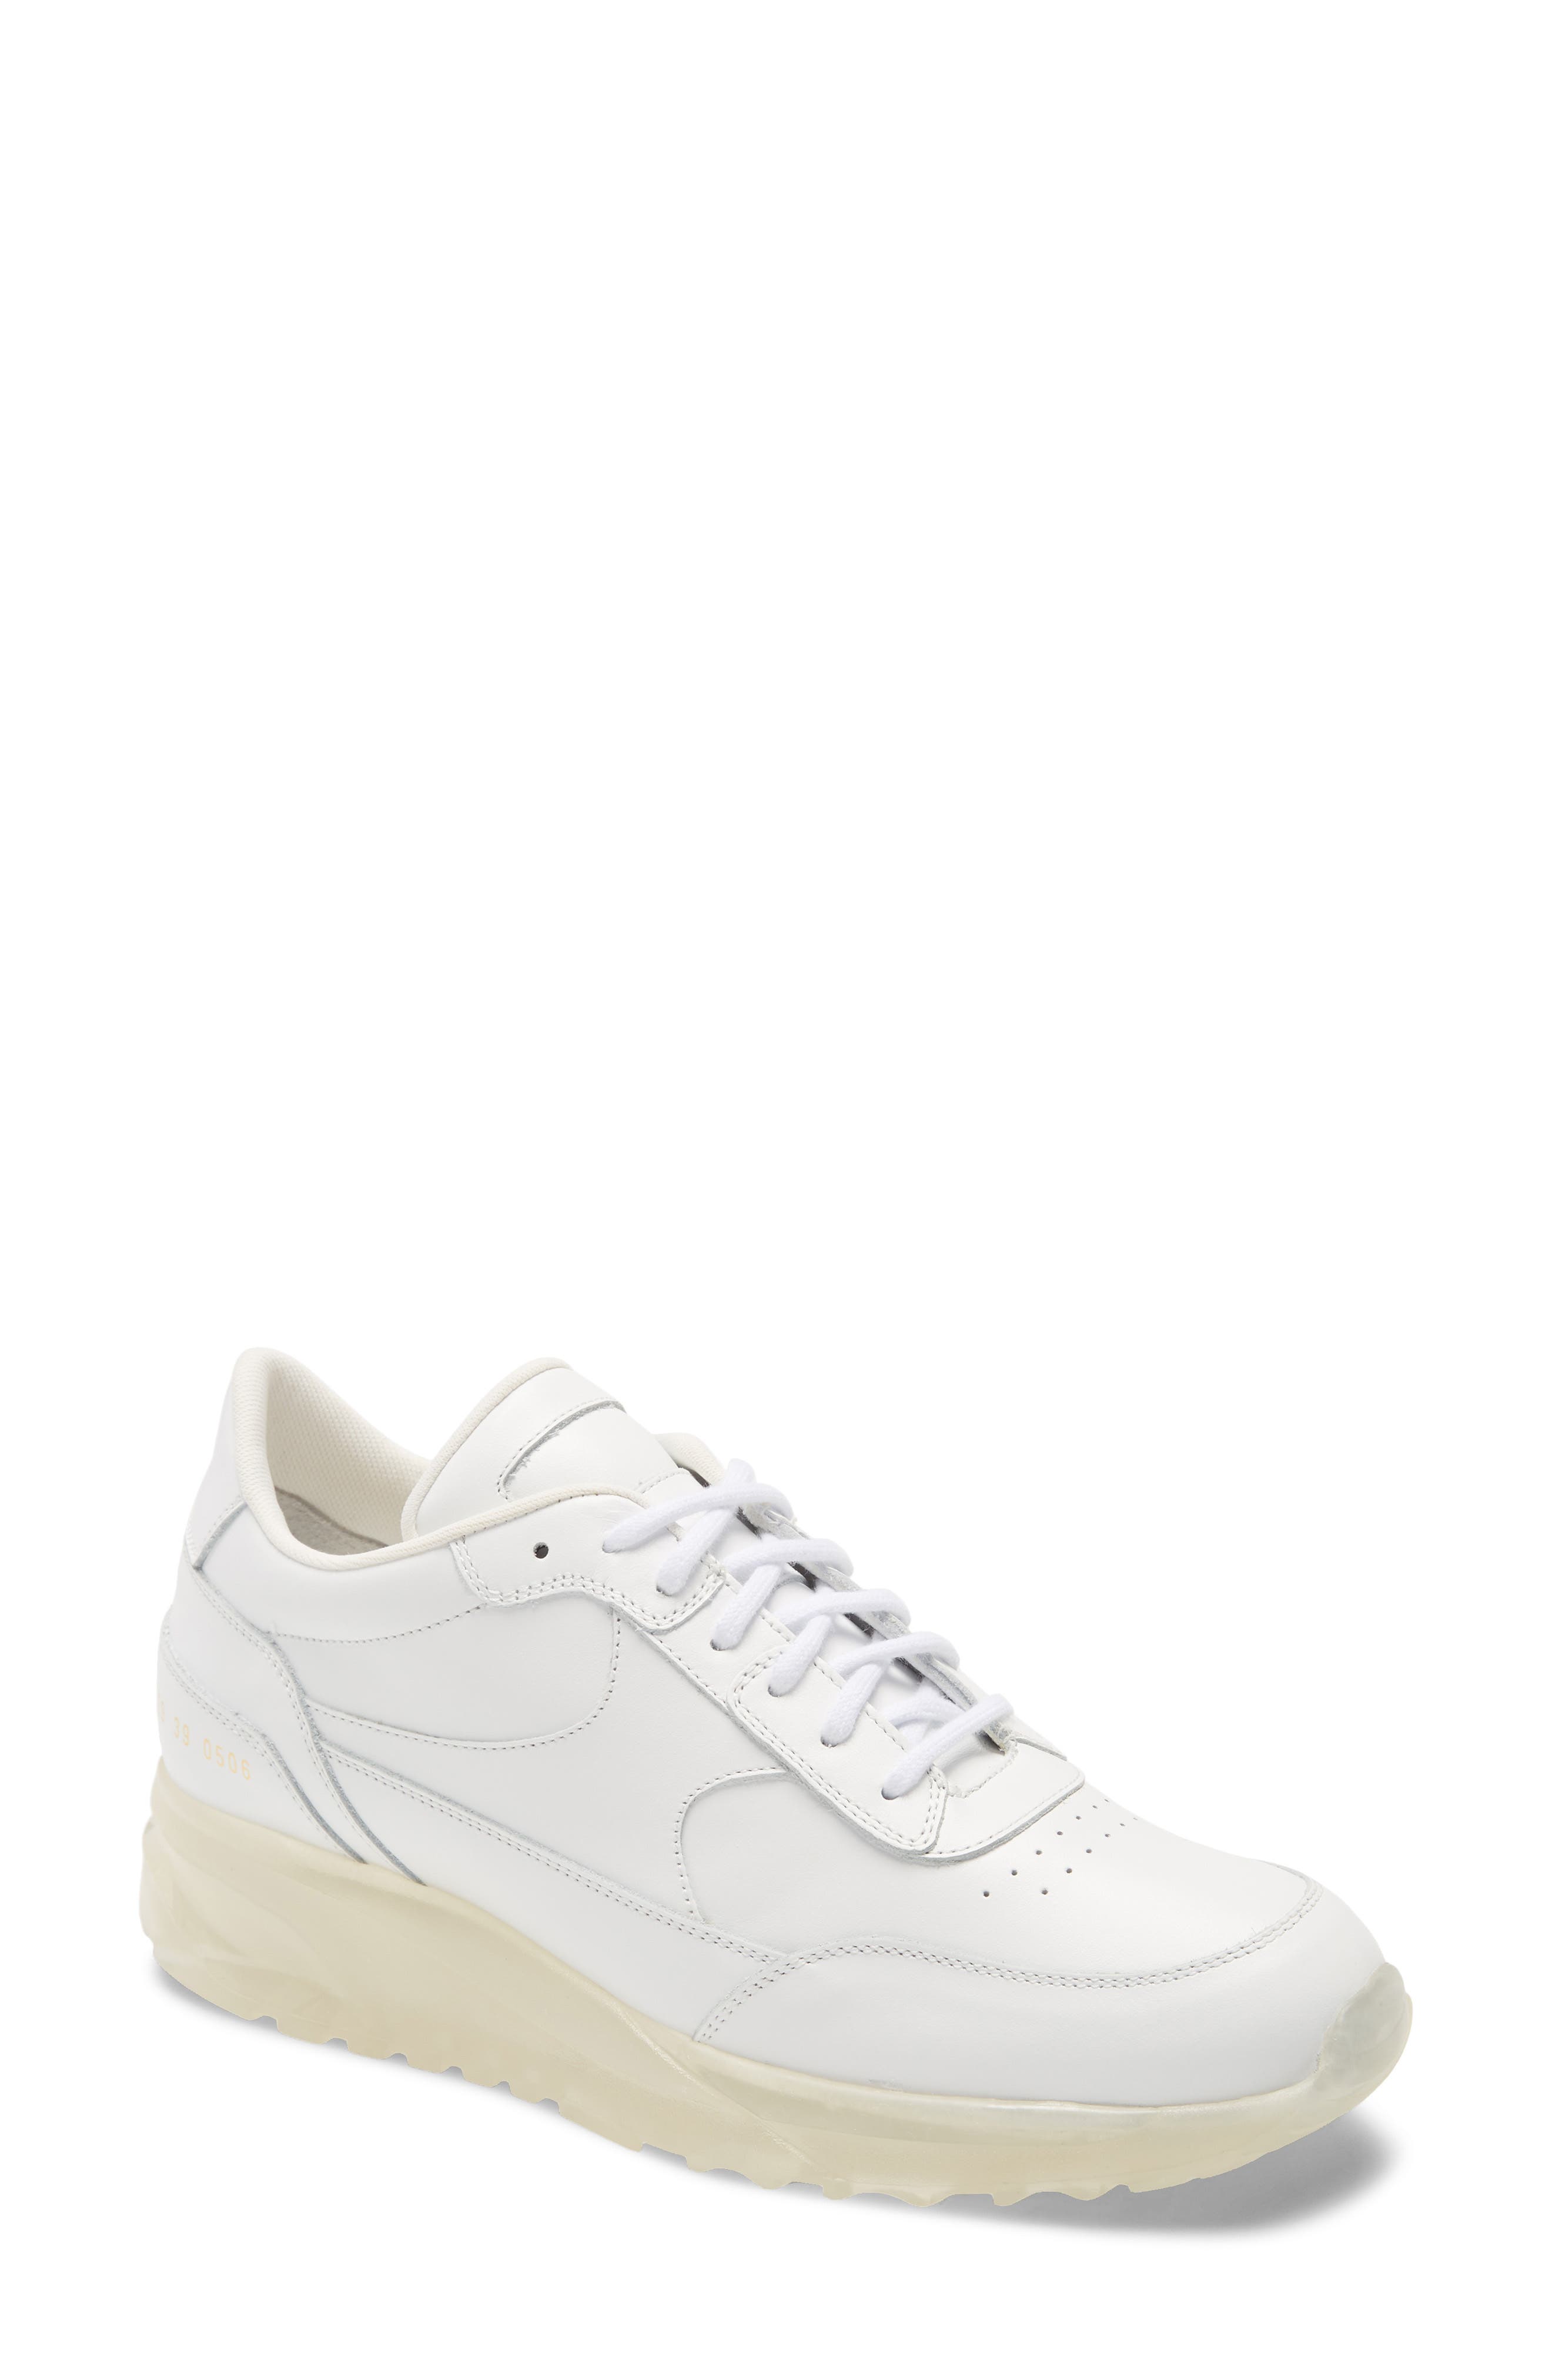 Common Projects | Track Classic Sneaker 